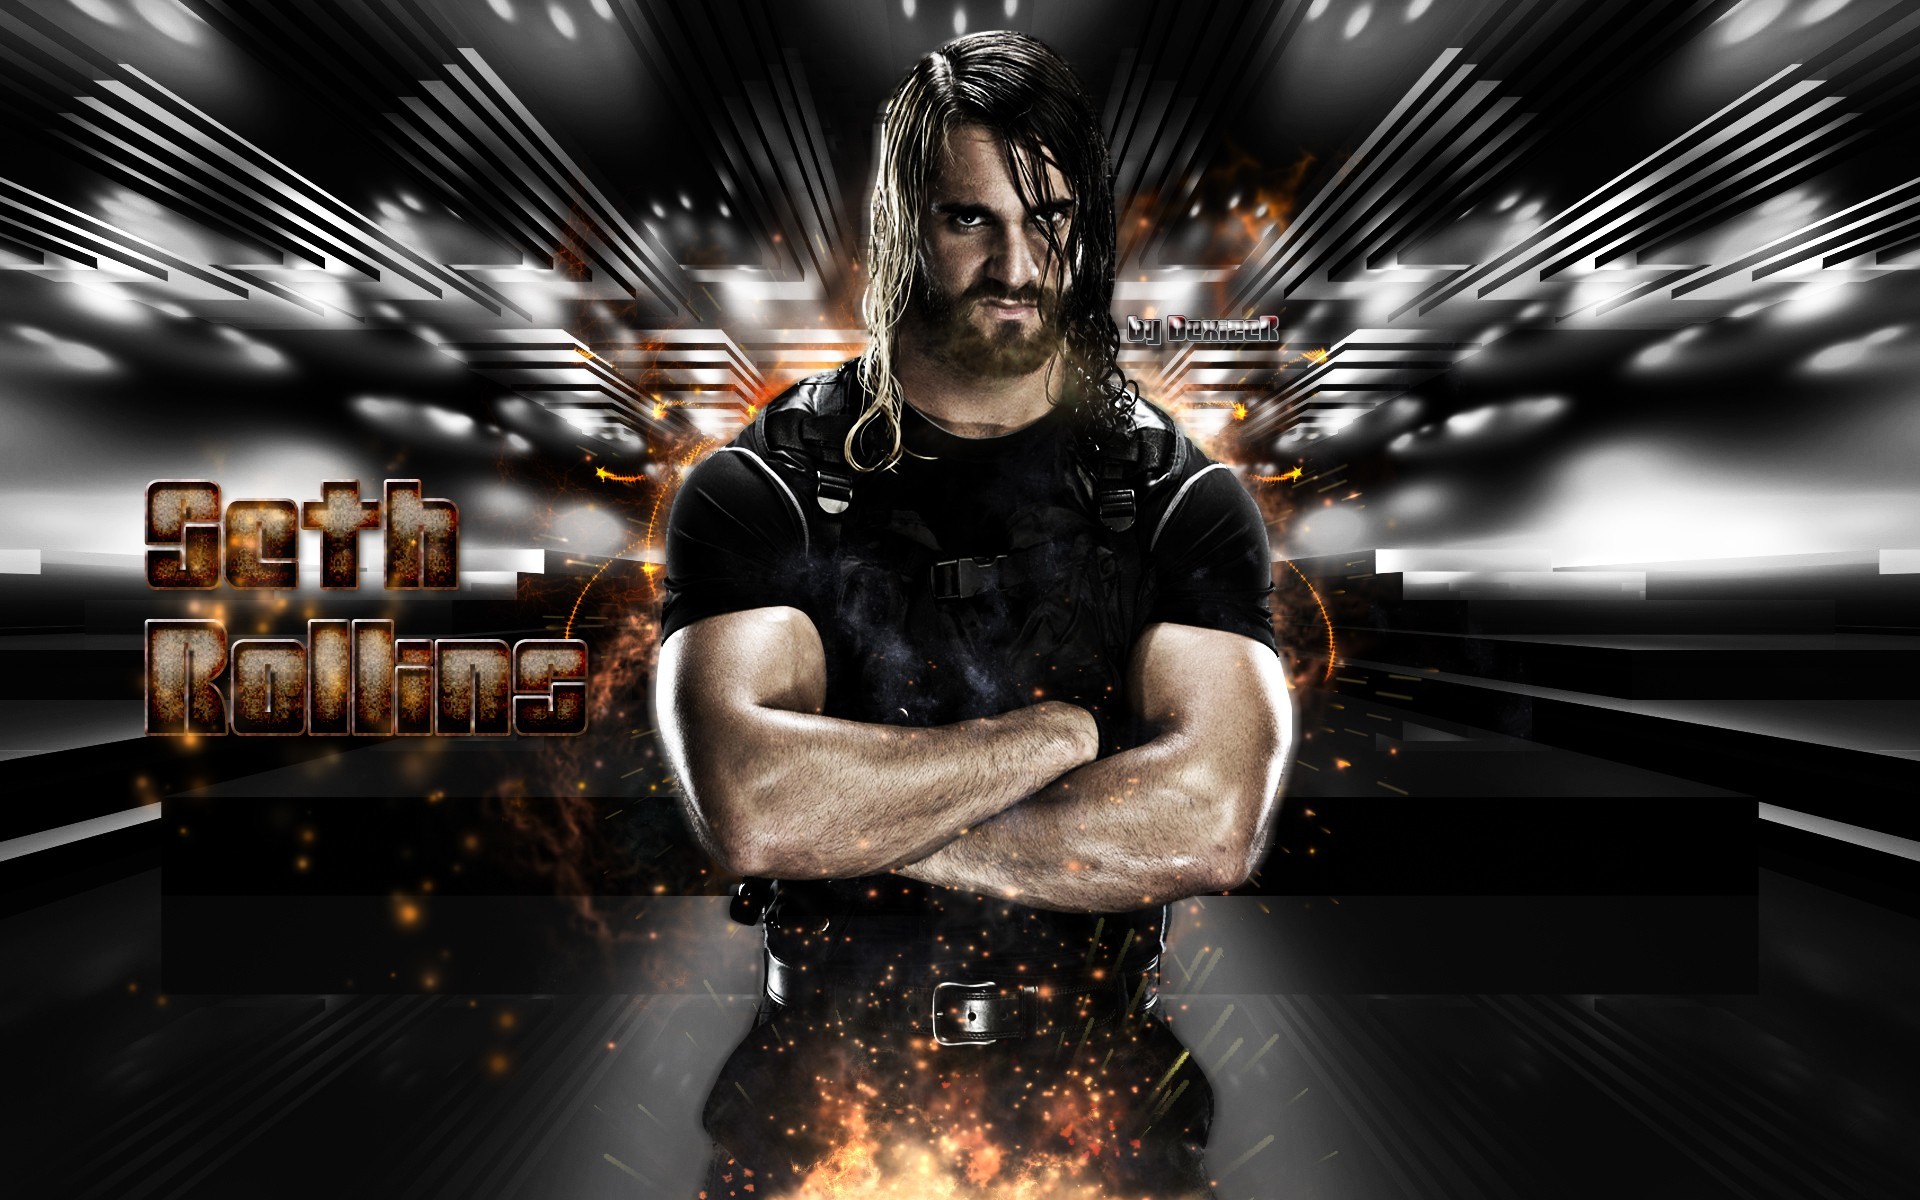 1920x1200 ... WWE Payback - WWE Championship Match Wallpaper by MarcusMarcel on .